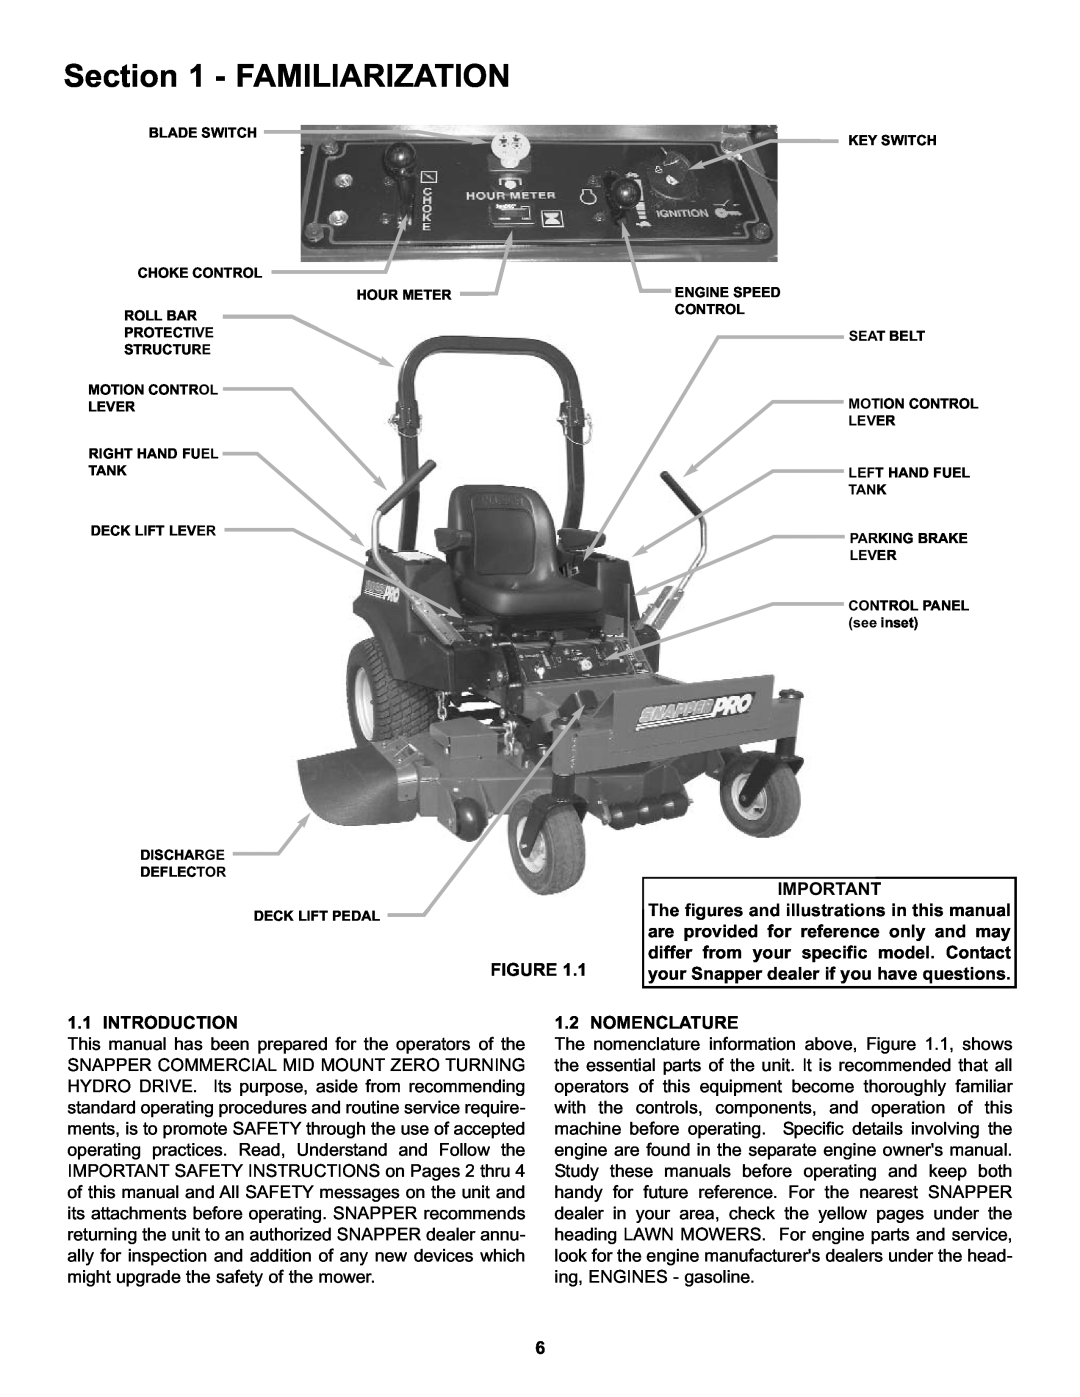 Snapper CZT19481KWV important safety instructions Familiarization, Introduction, Nomenclature 